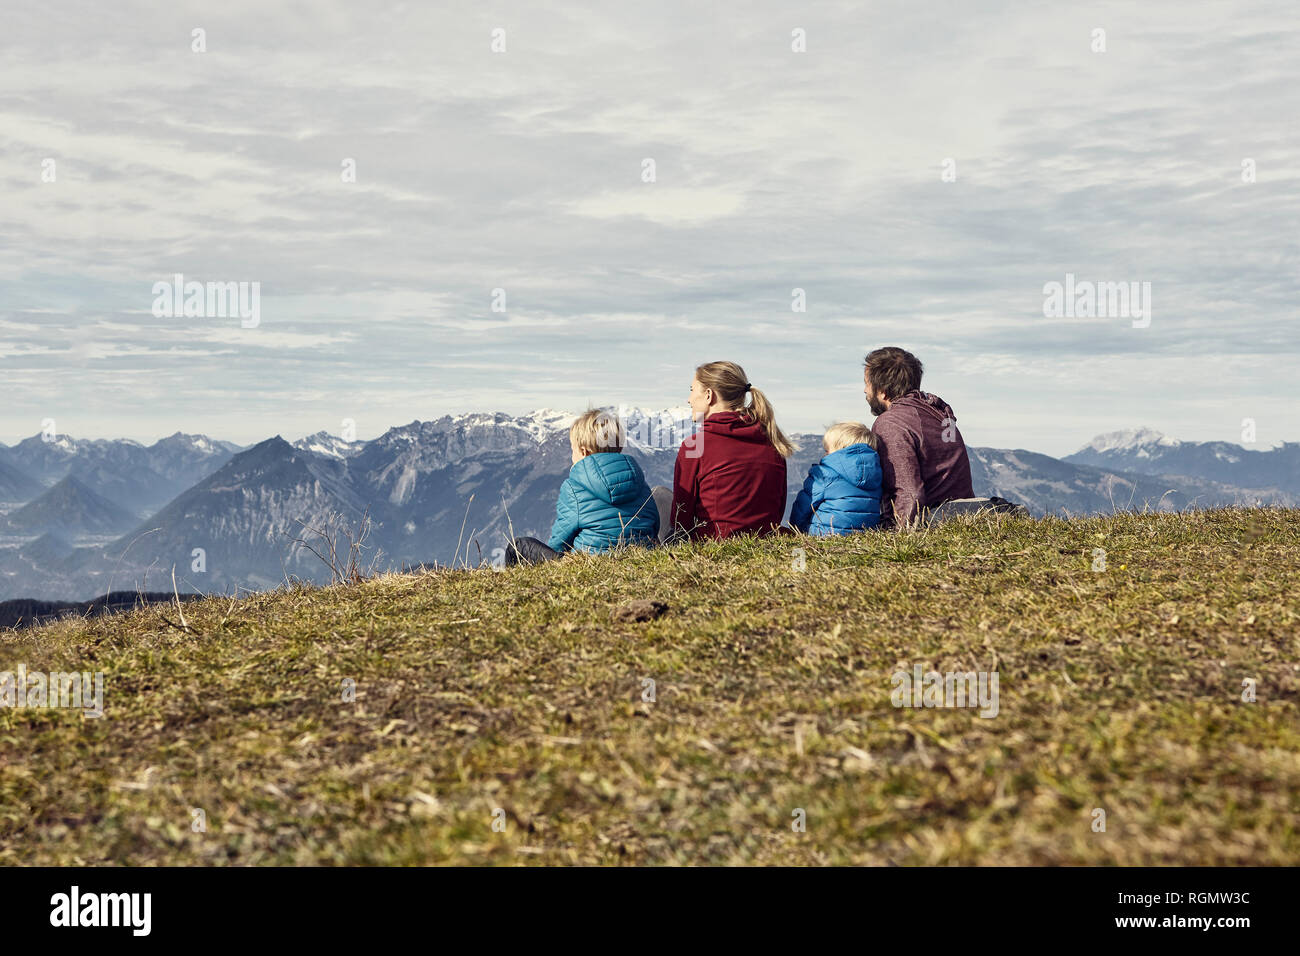 Italy, South Tyrol, Geissler group, family hiking, sitting on meadow Stock Photo